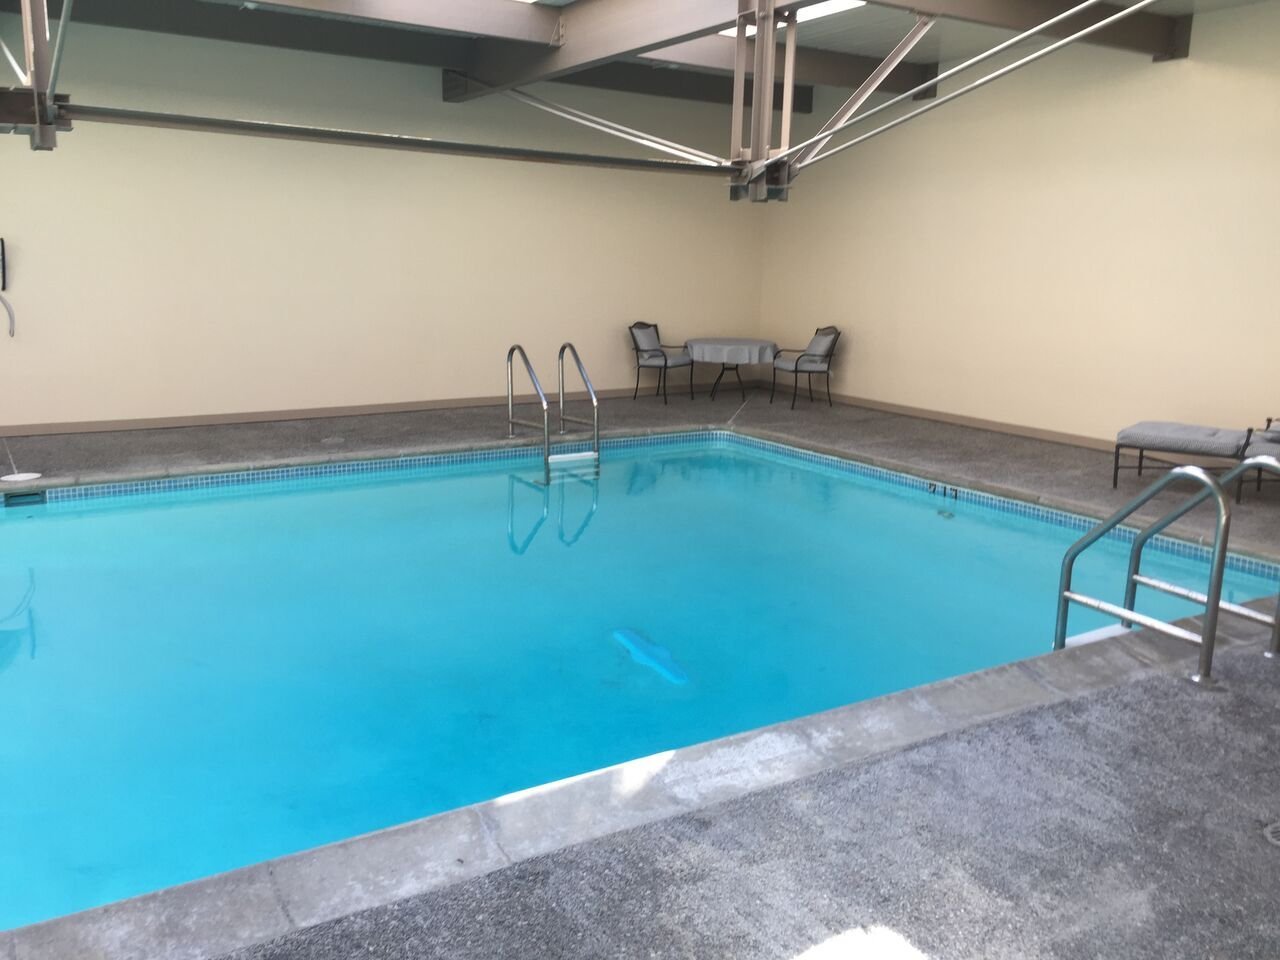  Shaughnessy Place Townhouses Indoor Pool!